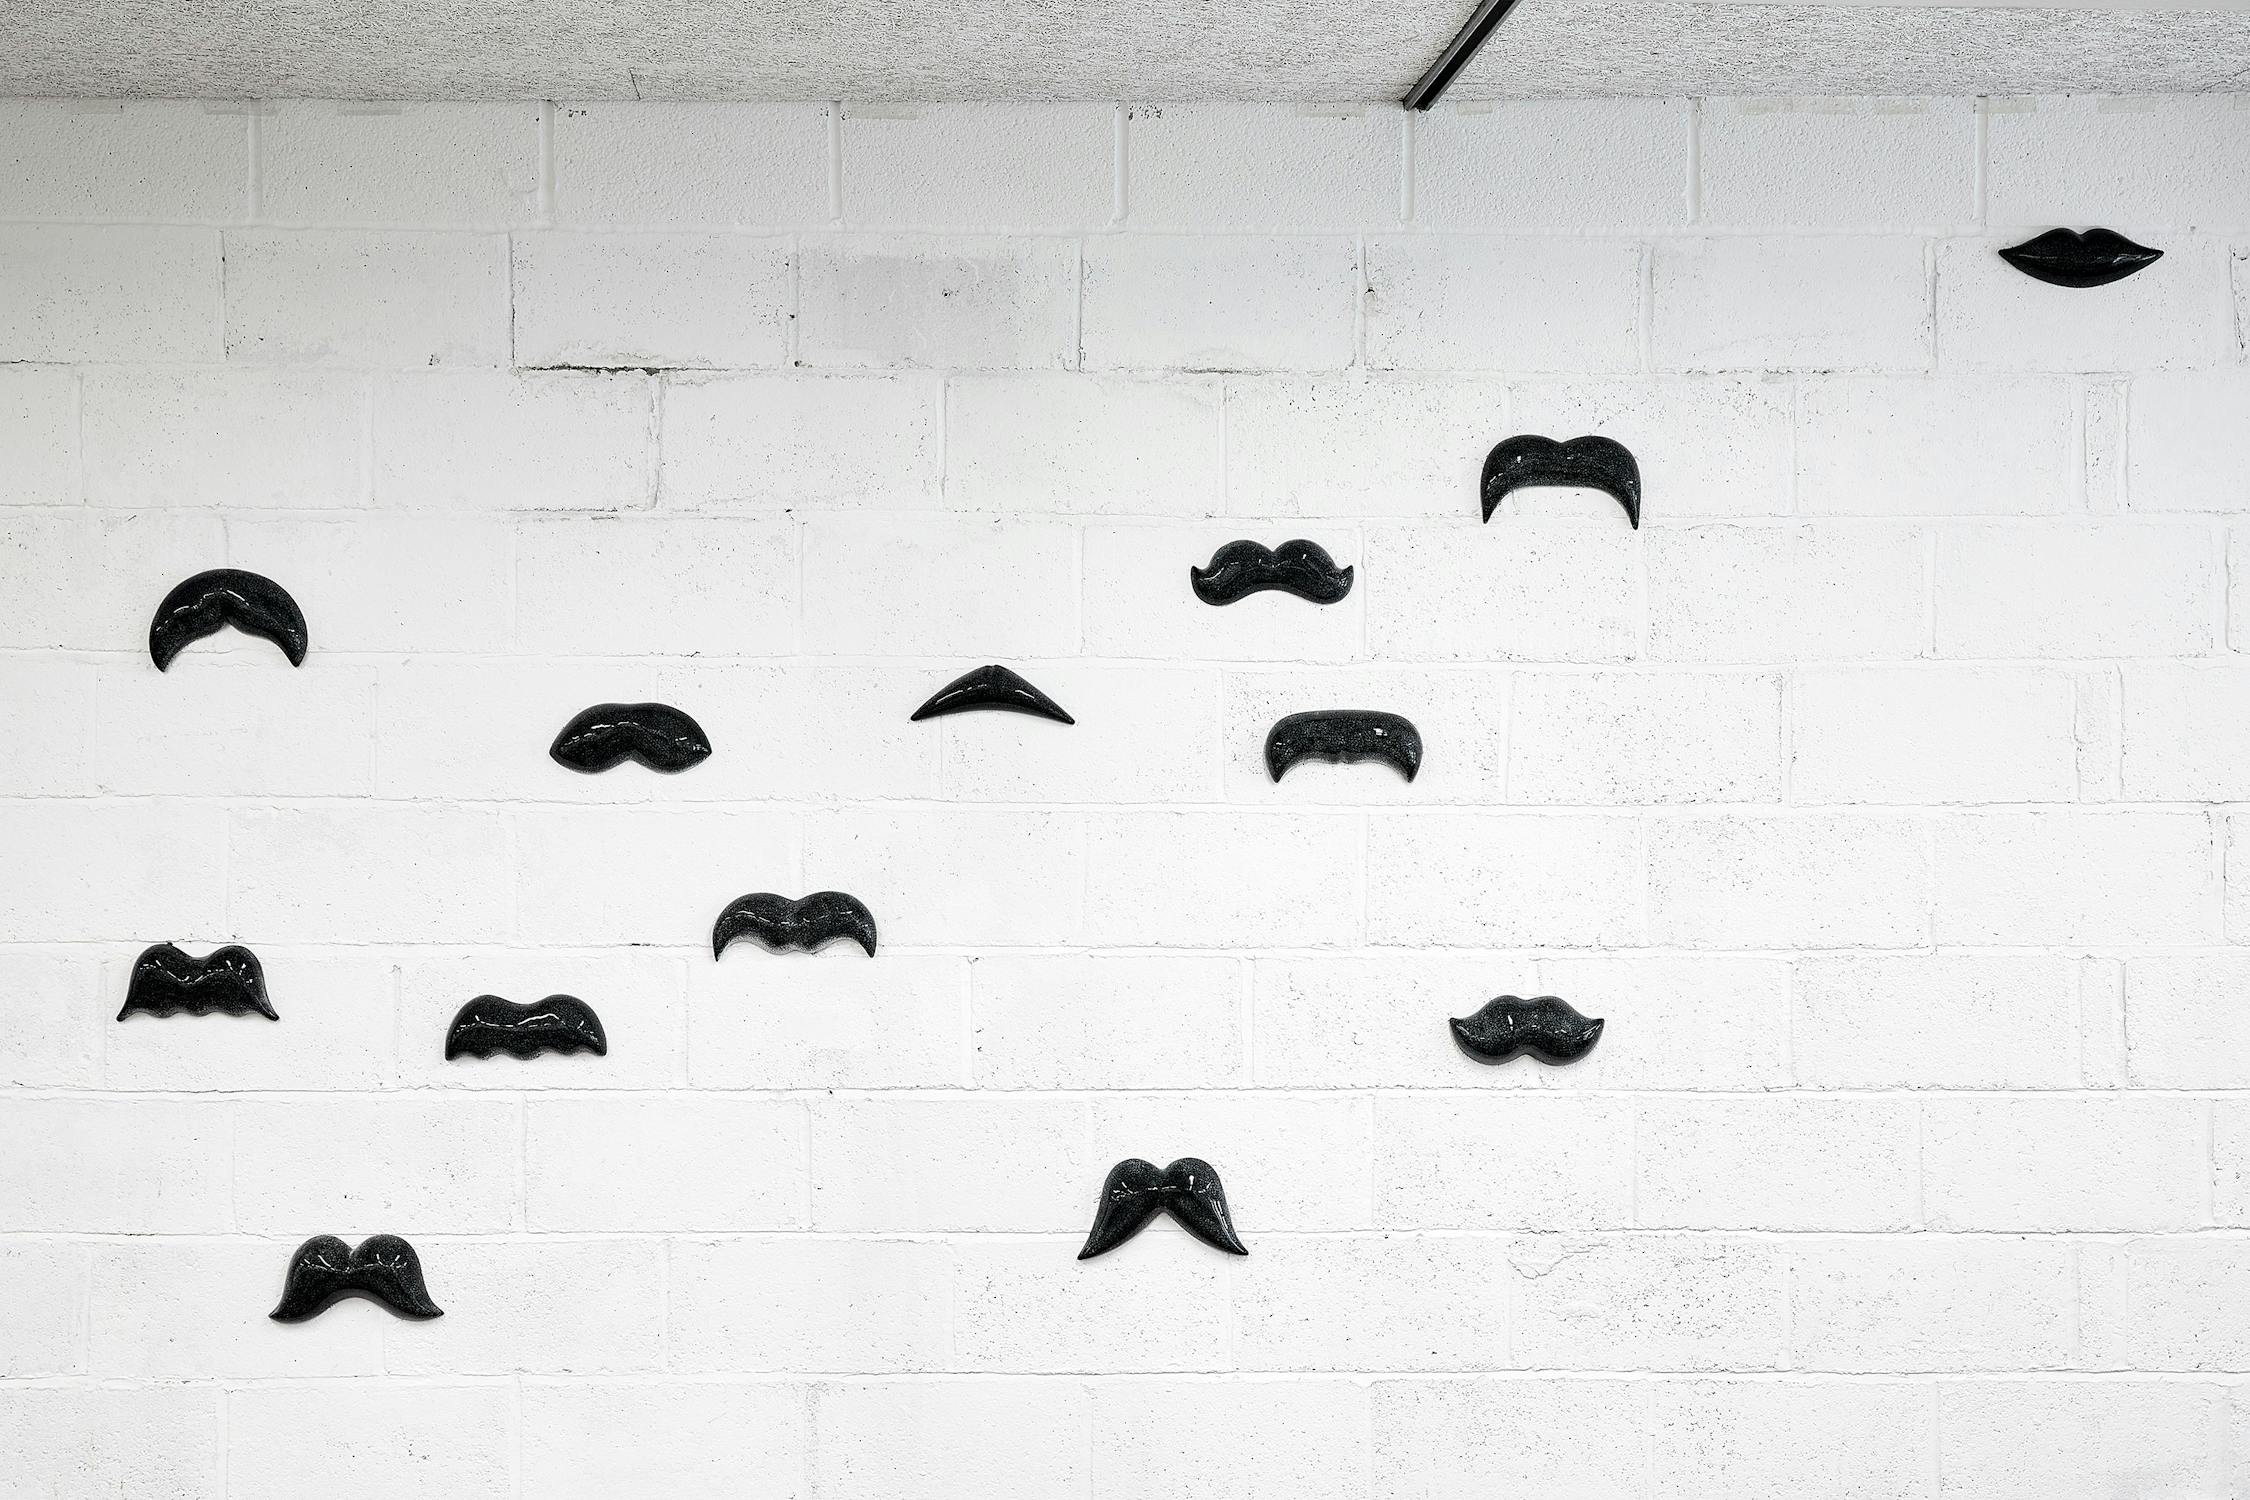 a photograph of an installation of sculptures that resemble moustaches, mounted on a white brick wall.